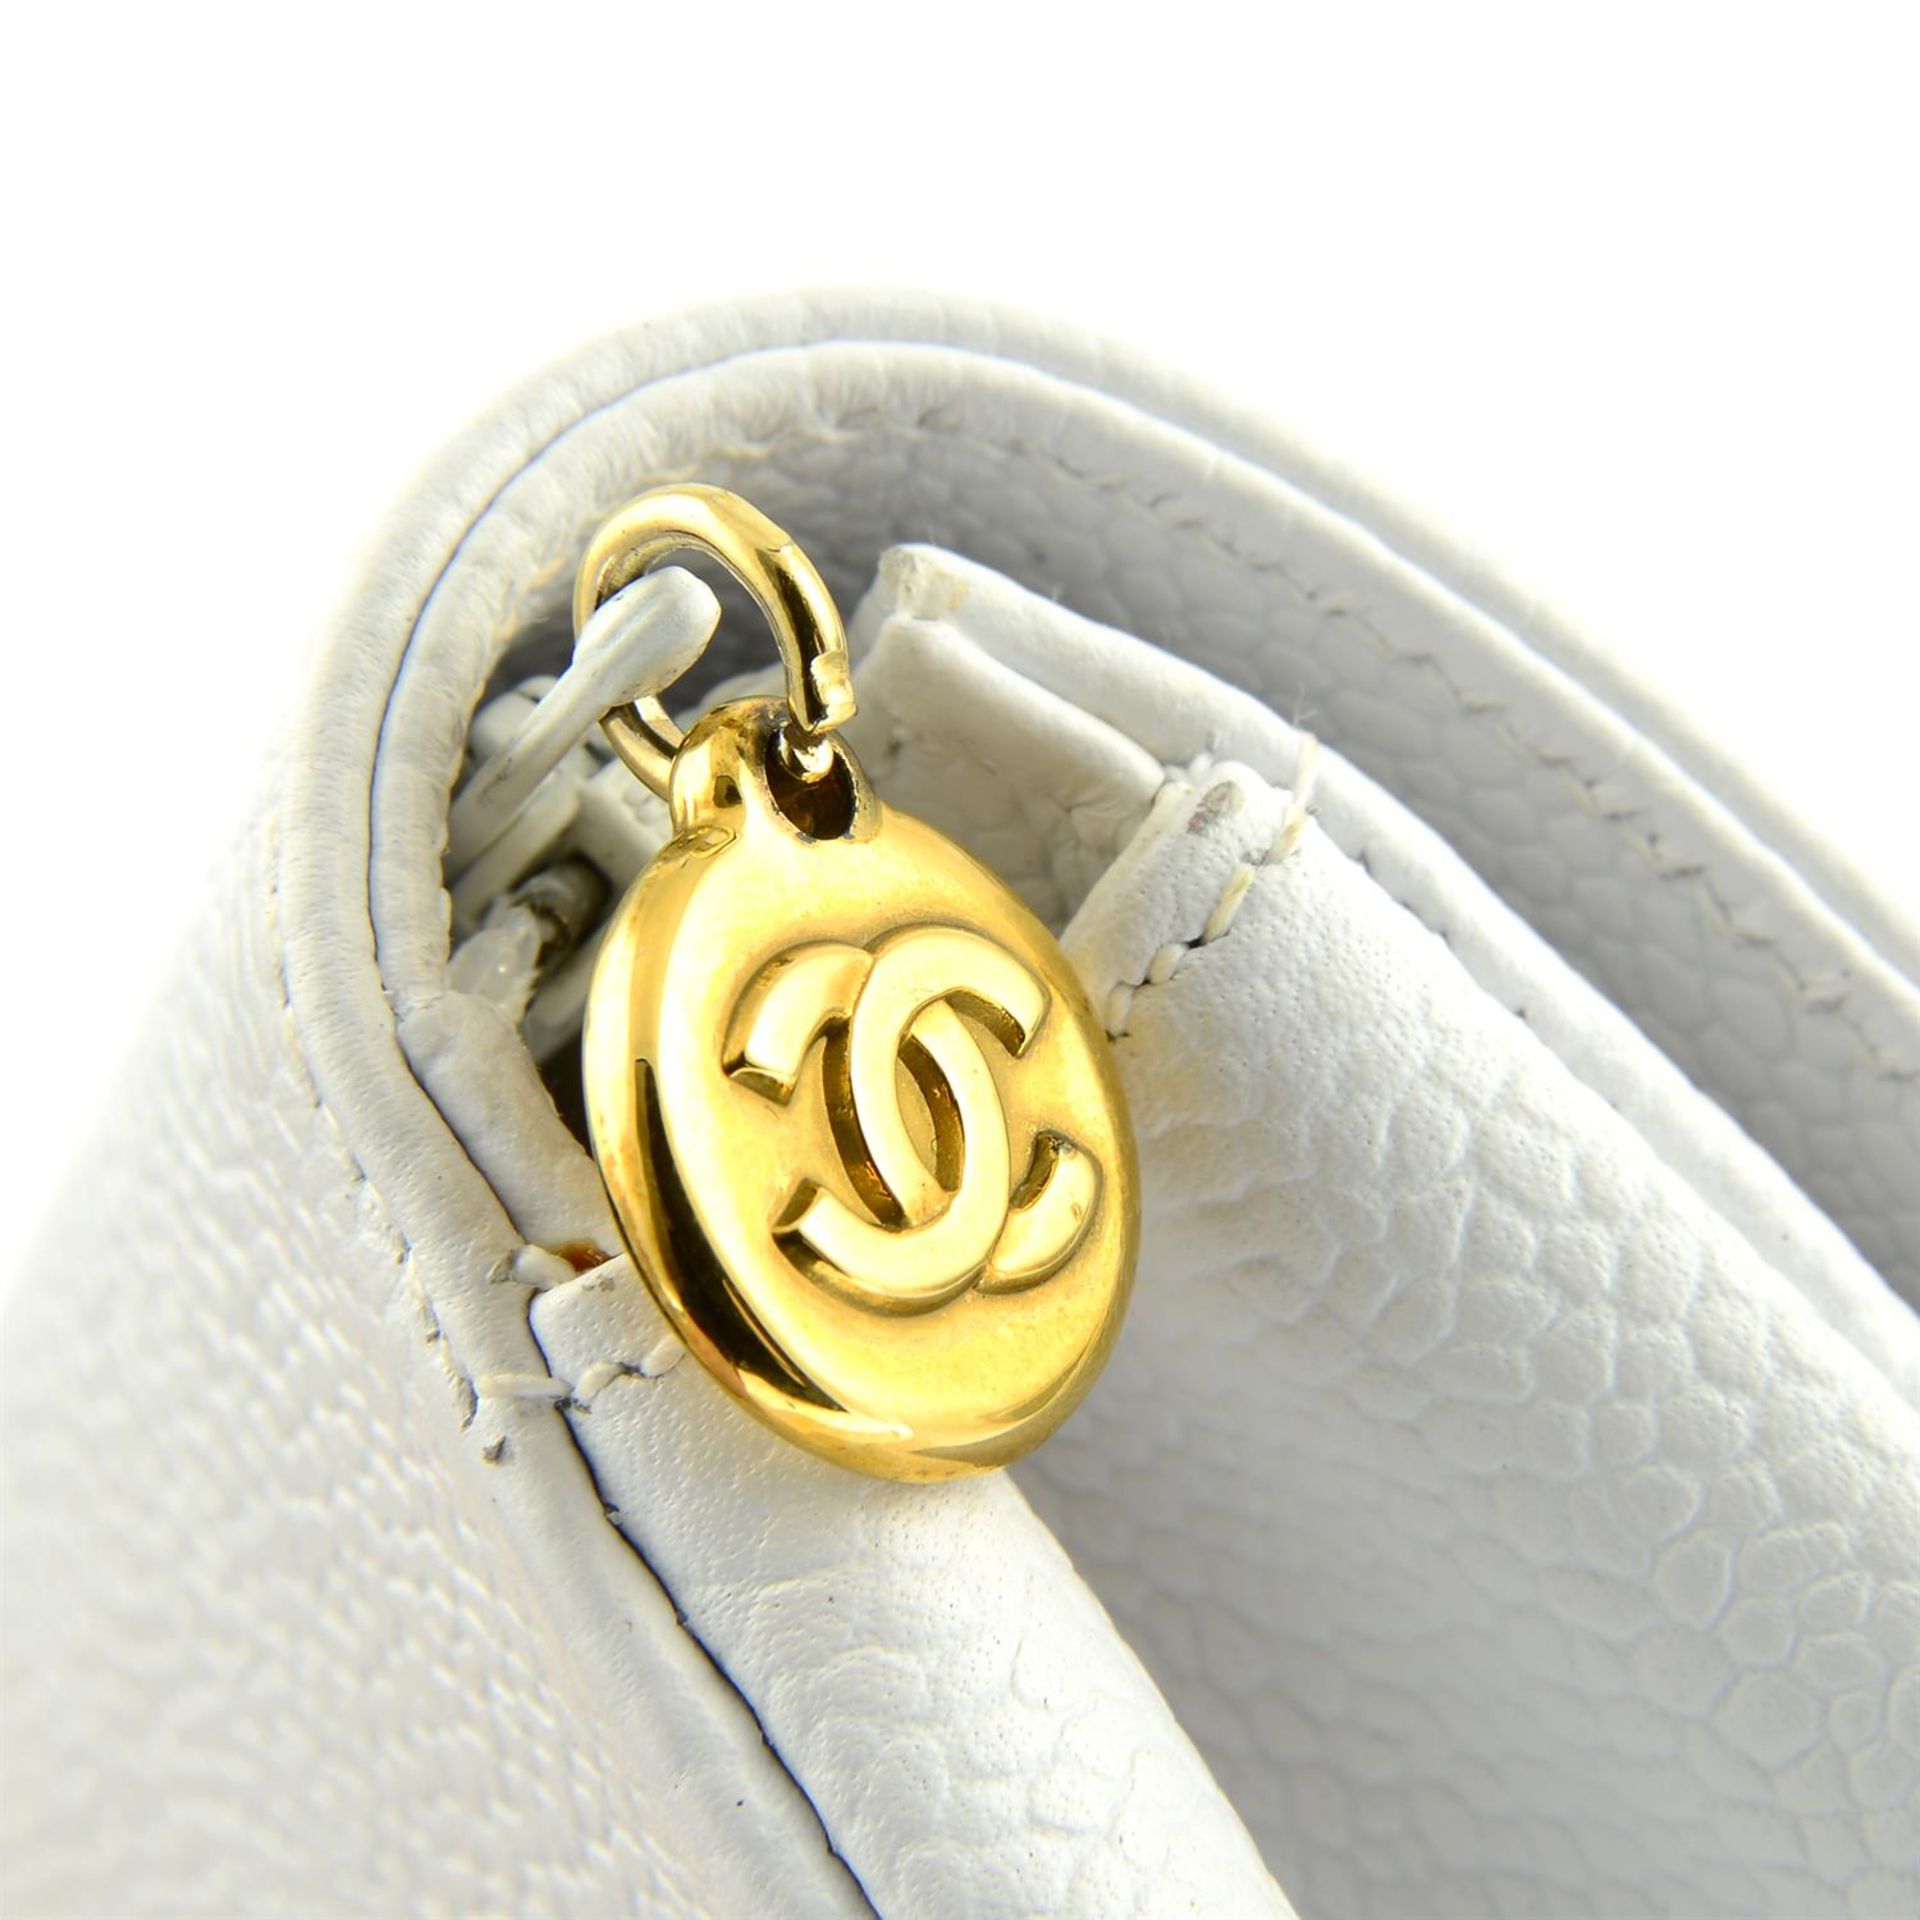 CHANEL - a 1996 white caviar leather cosmetic pouch. - Image 3 of 4